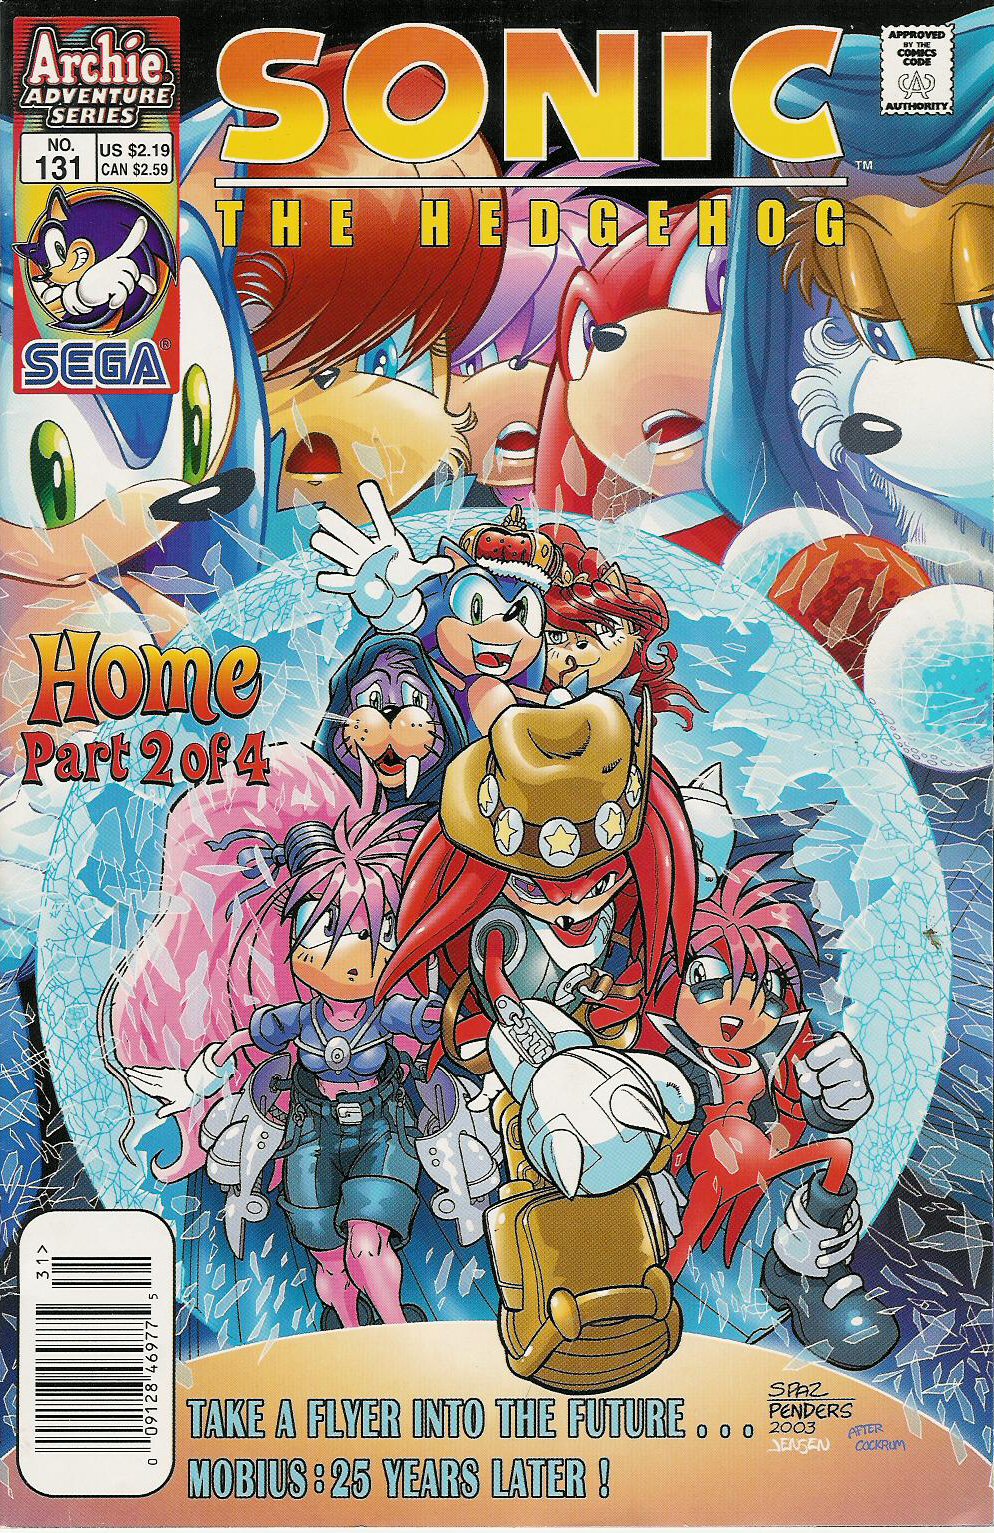 Sonic - Archie Adventure Series March 2004 Cover Page